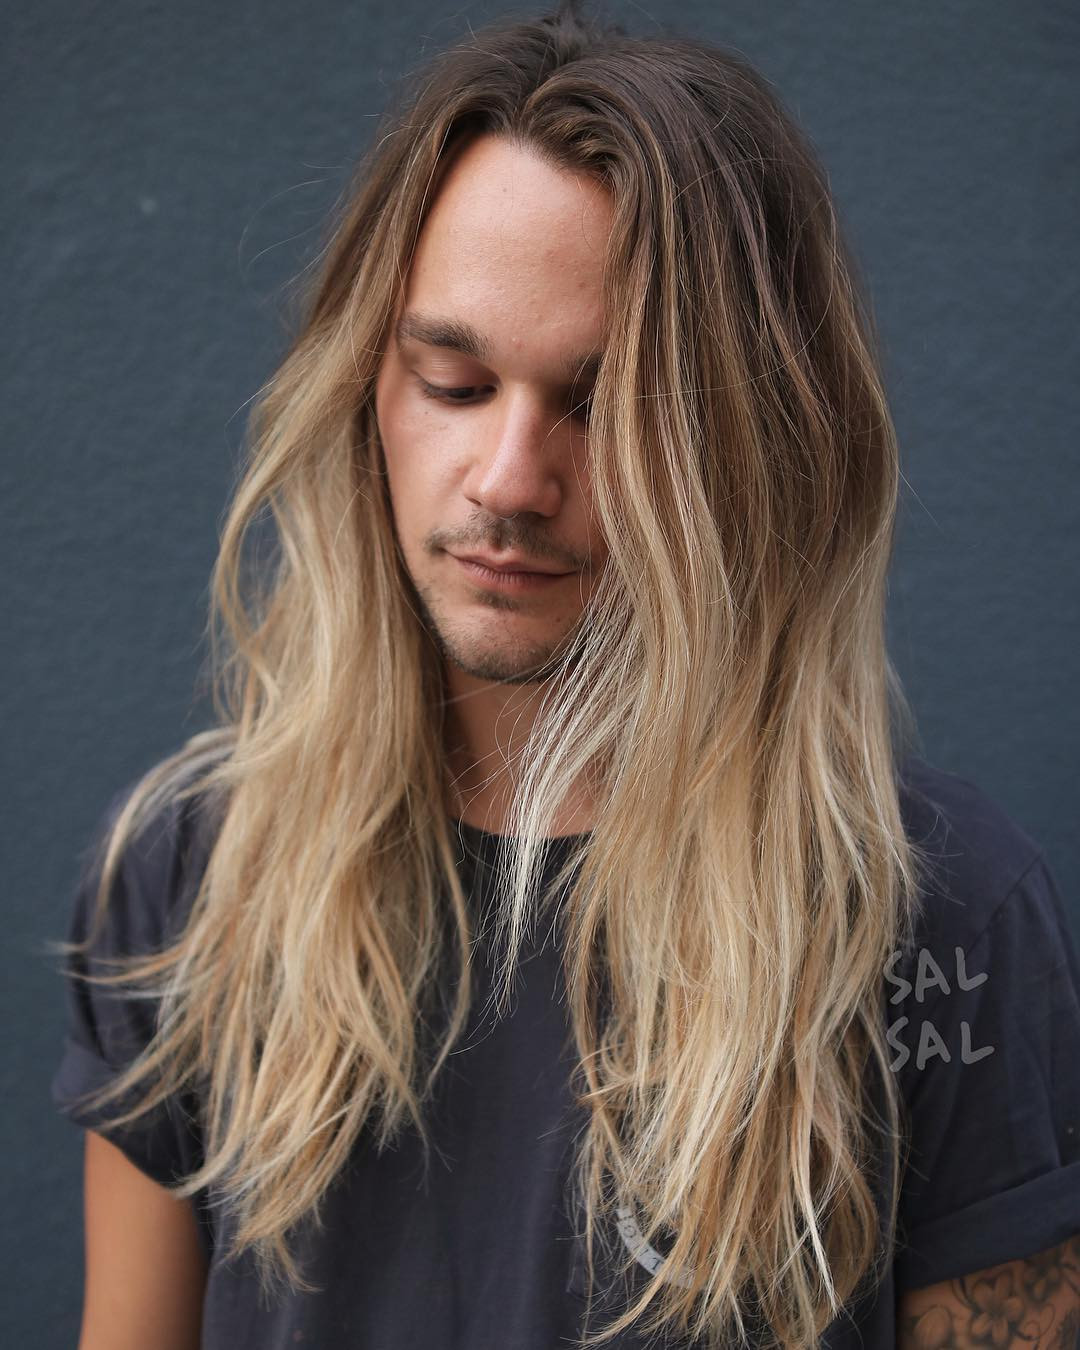 Hairstyles For Long Haired Boys
 The 44 Best Long Hairstyles for Men